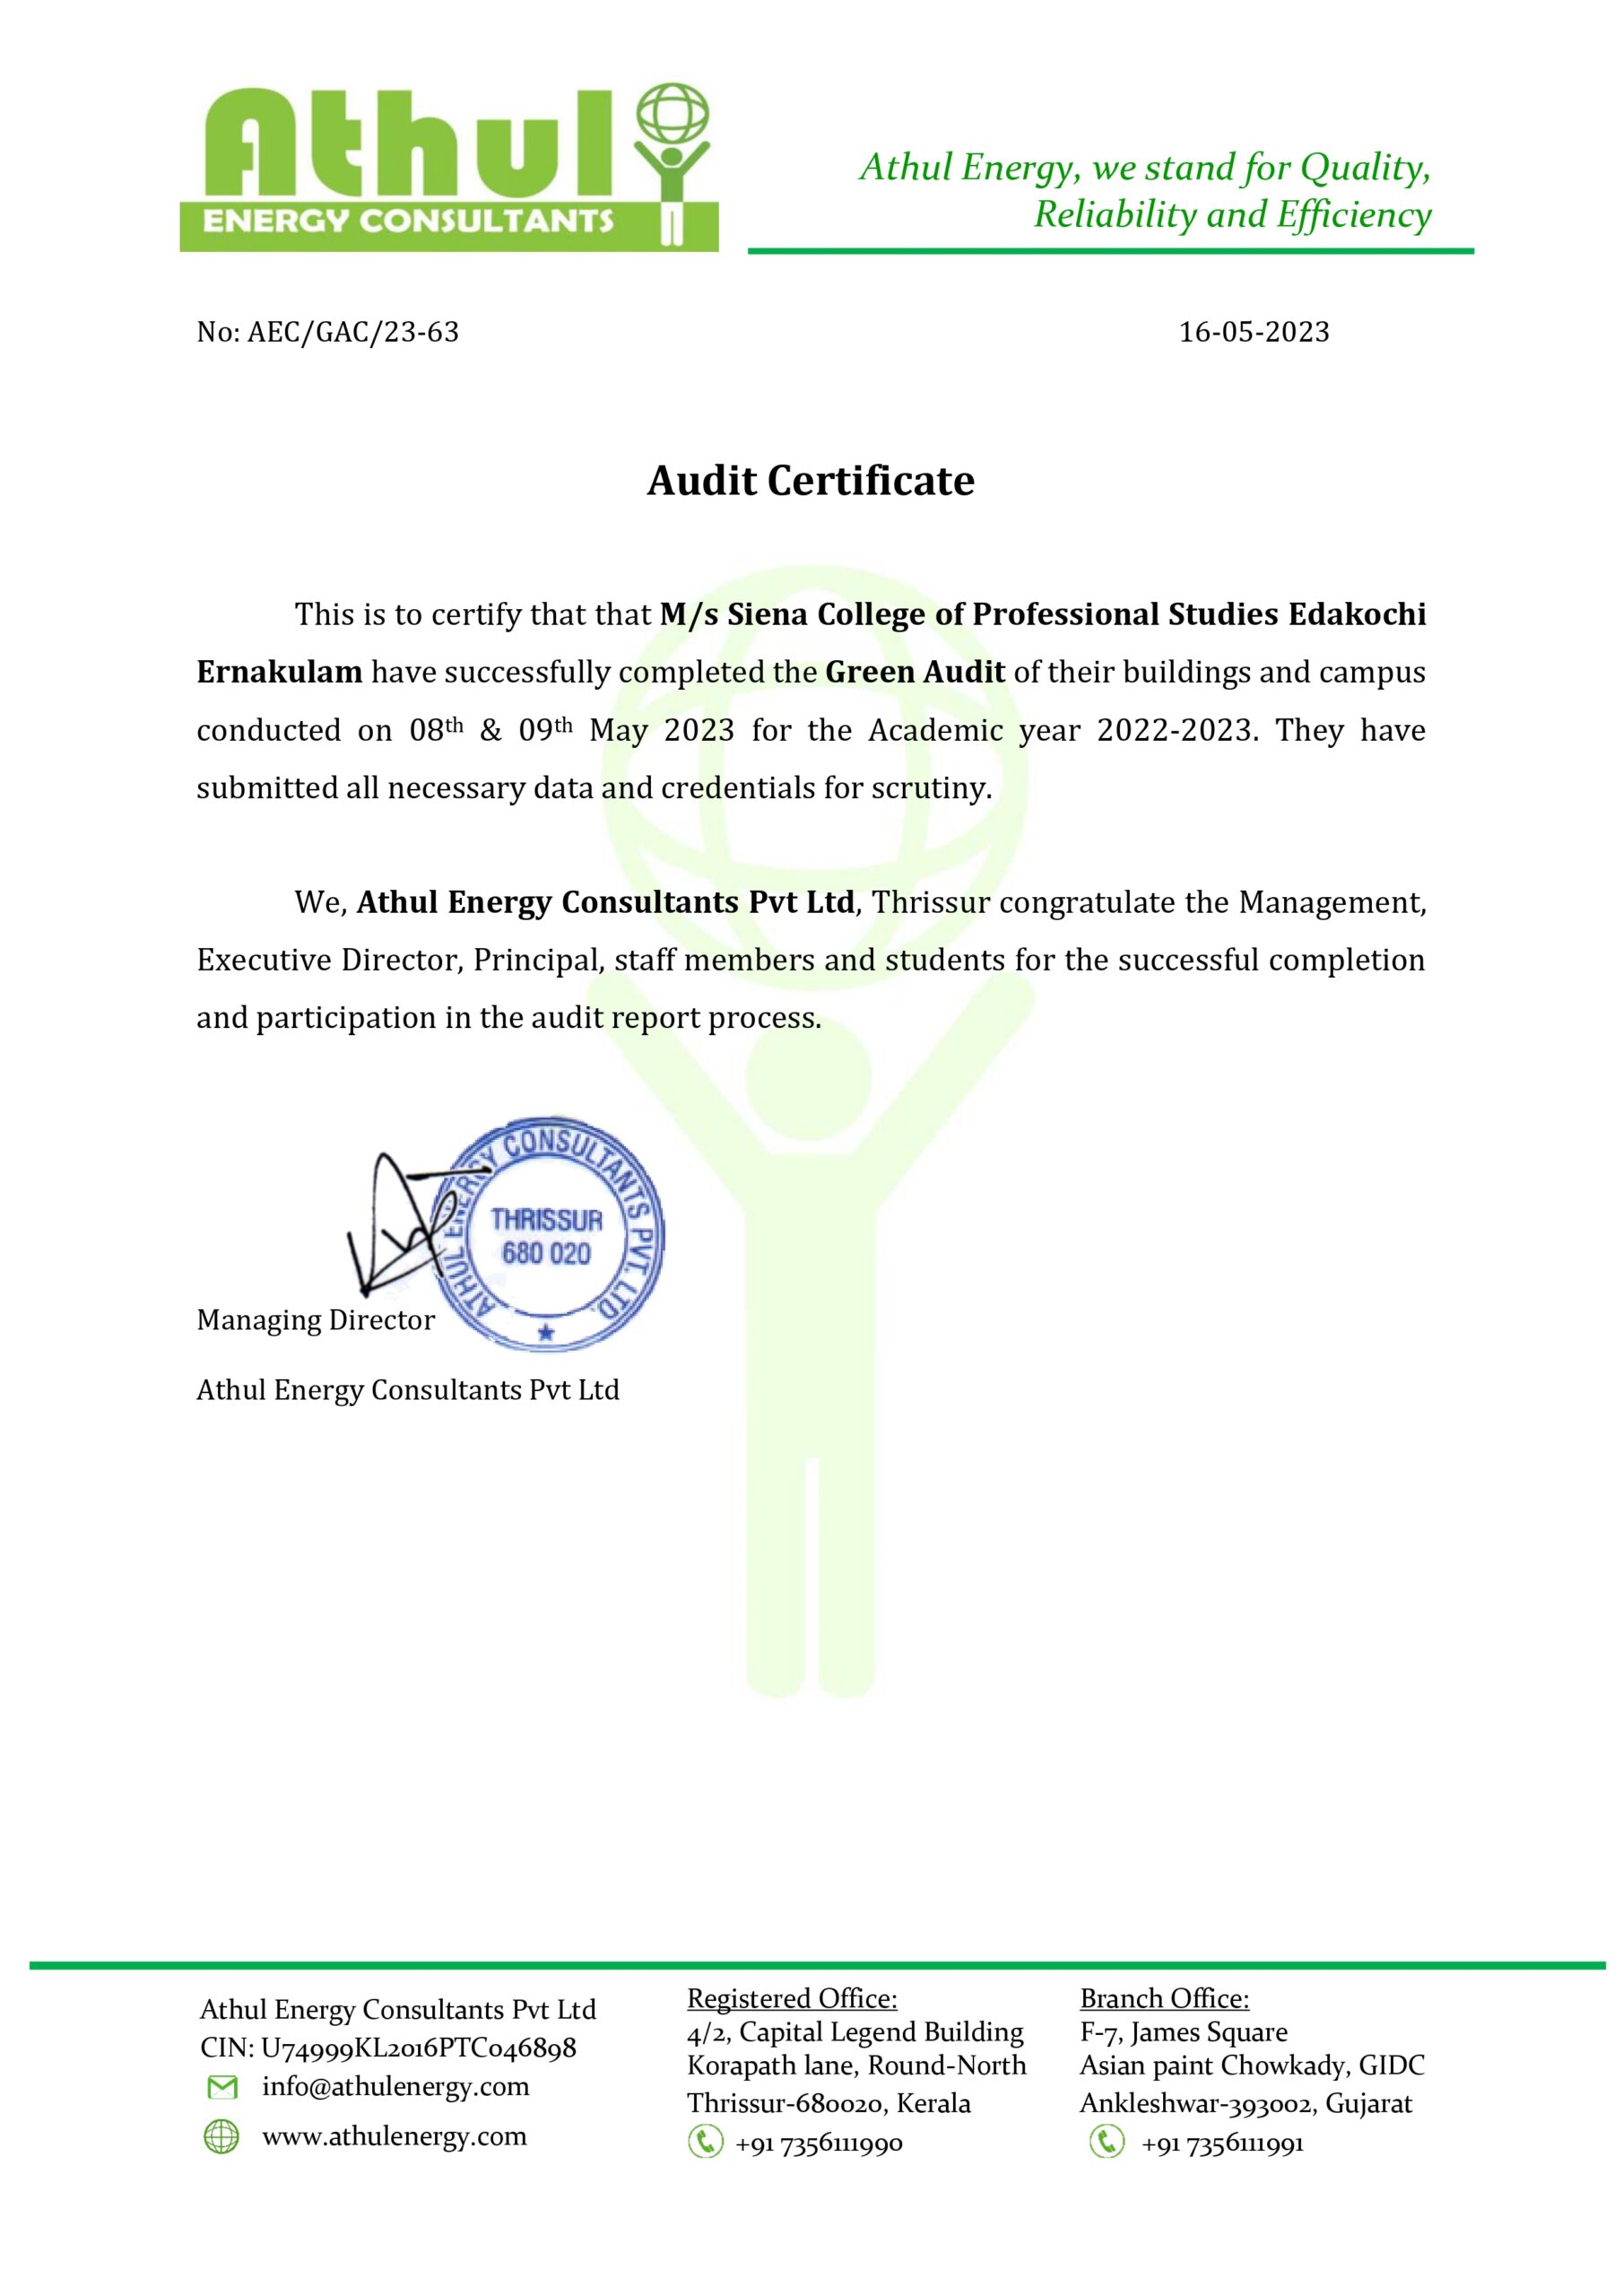 Siena college certificate-Green (1)_page-0001